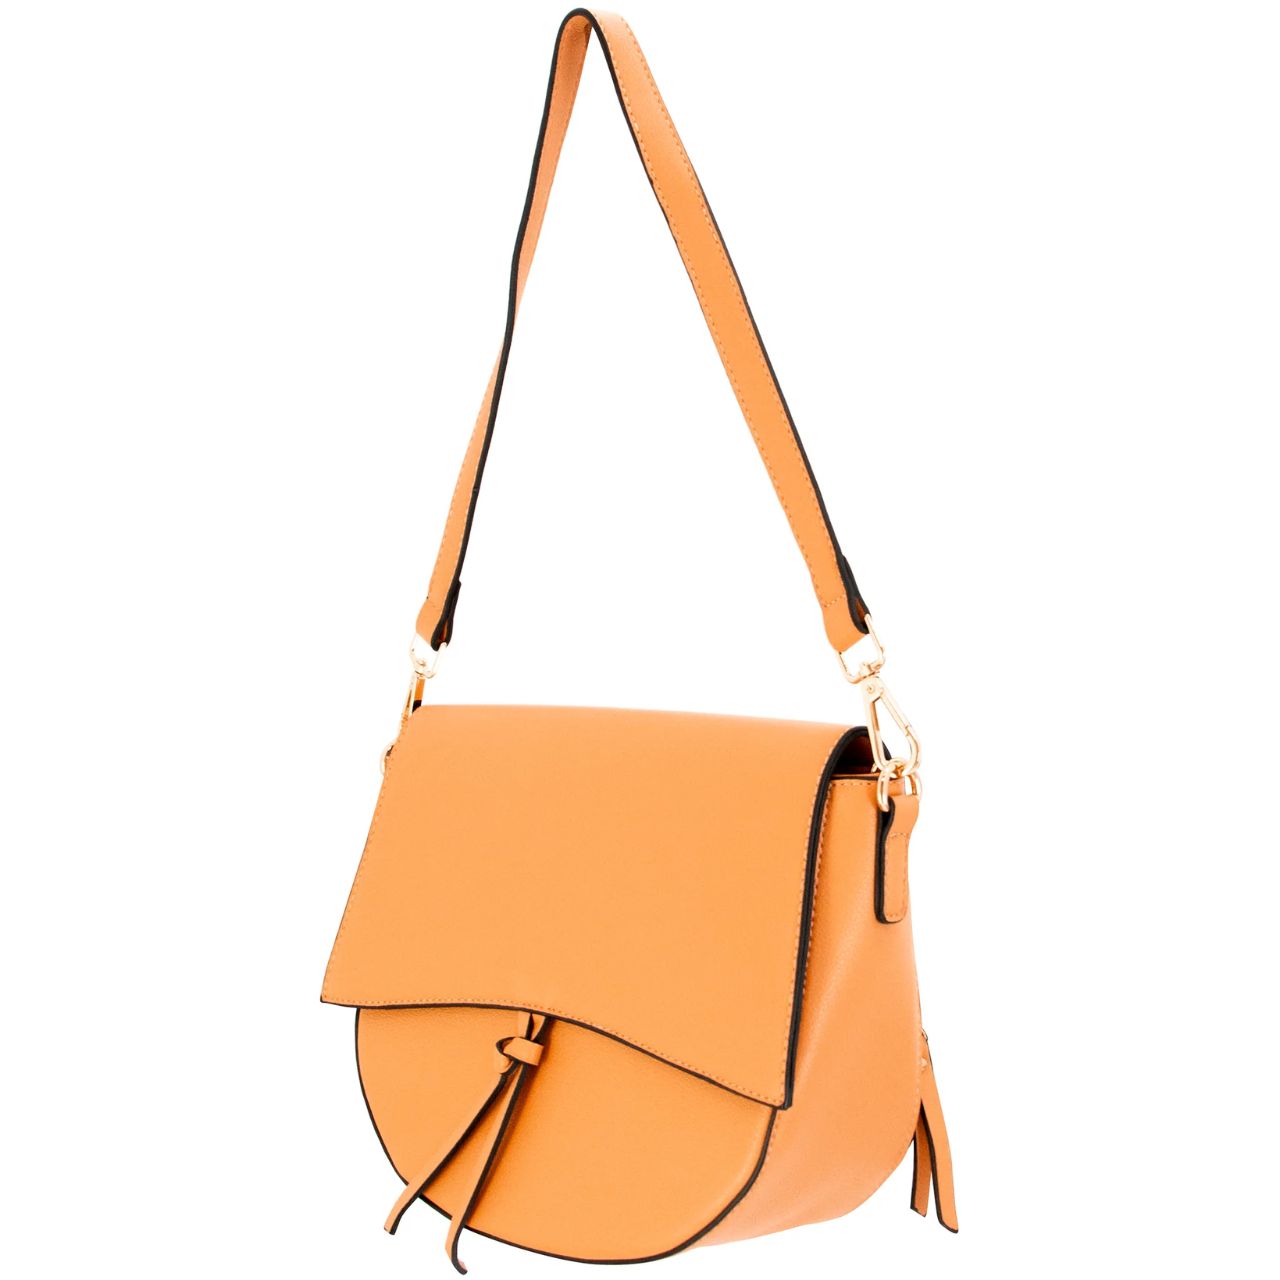 Apricot Leather Concealed Carry Purse